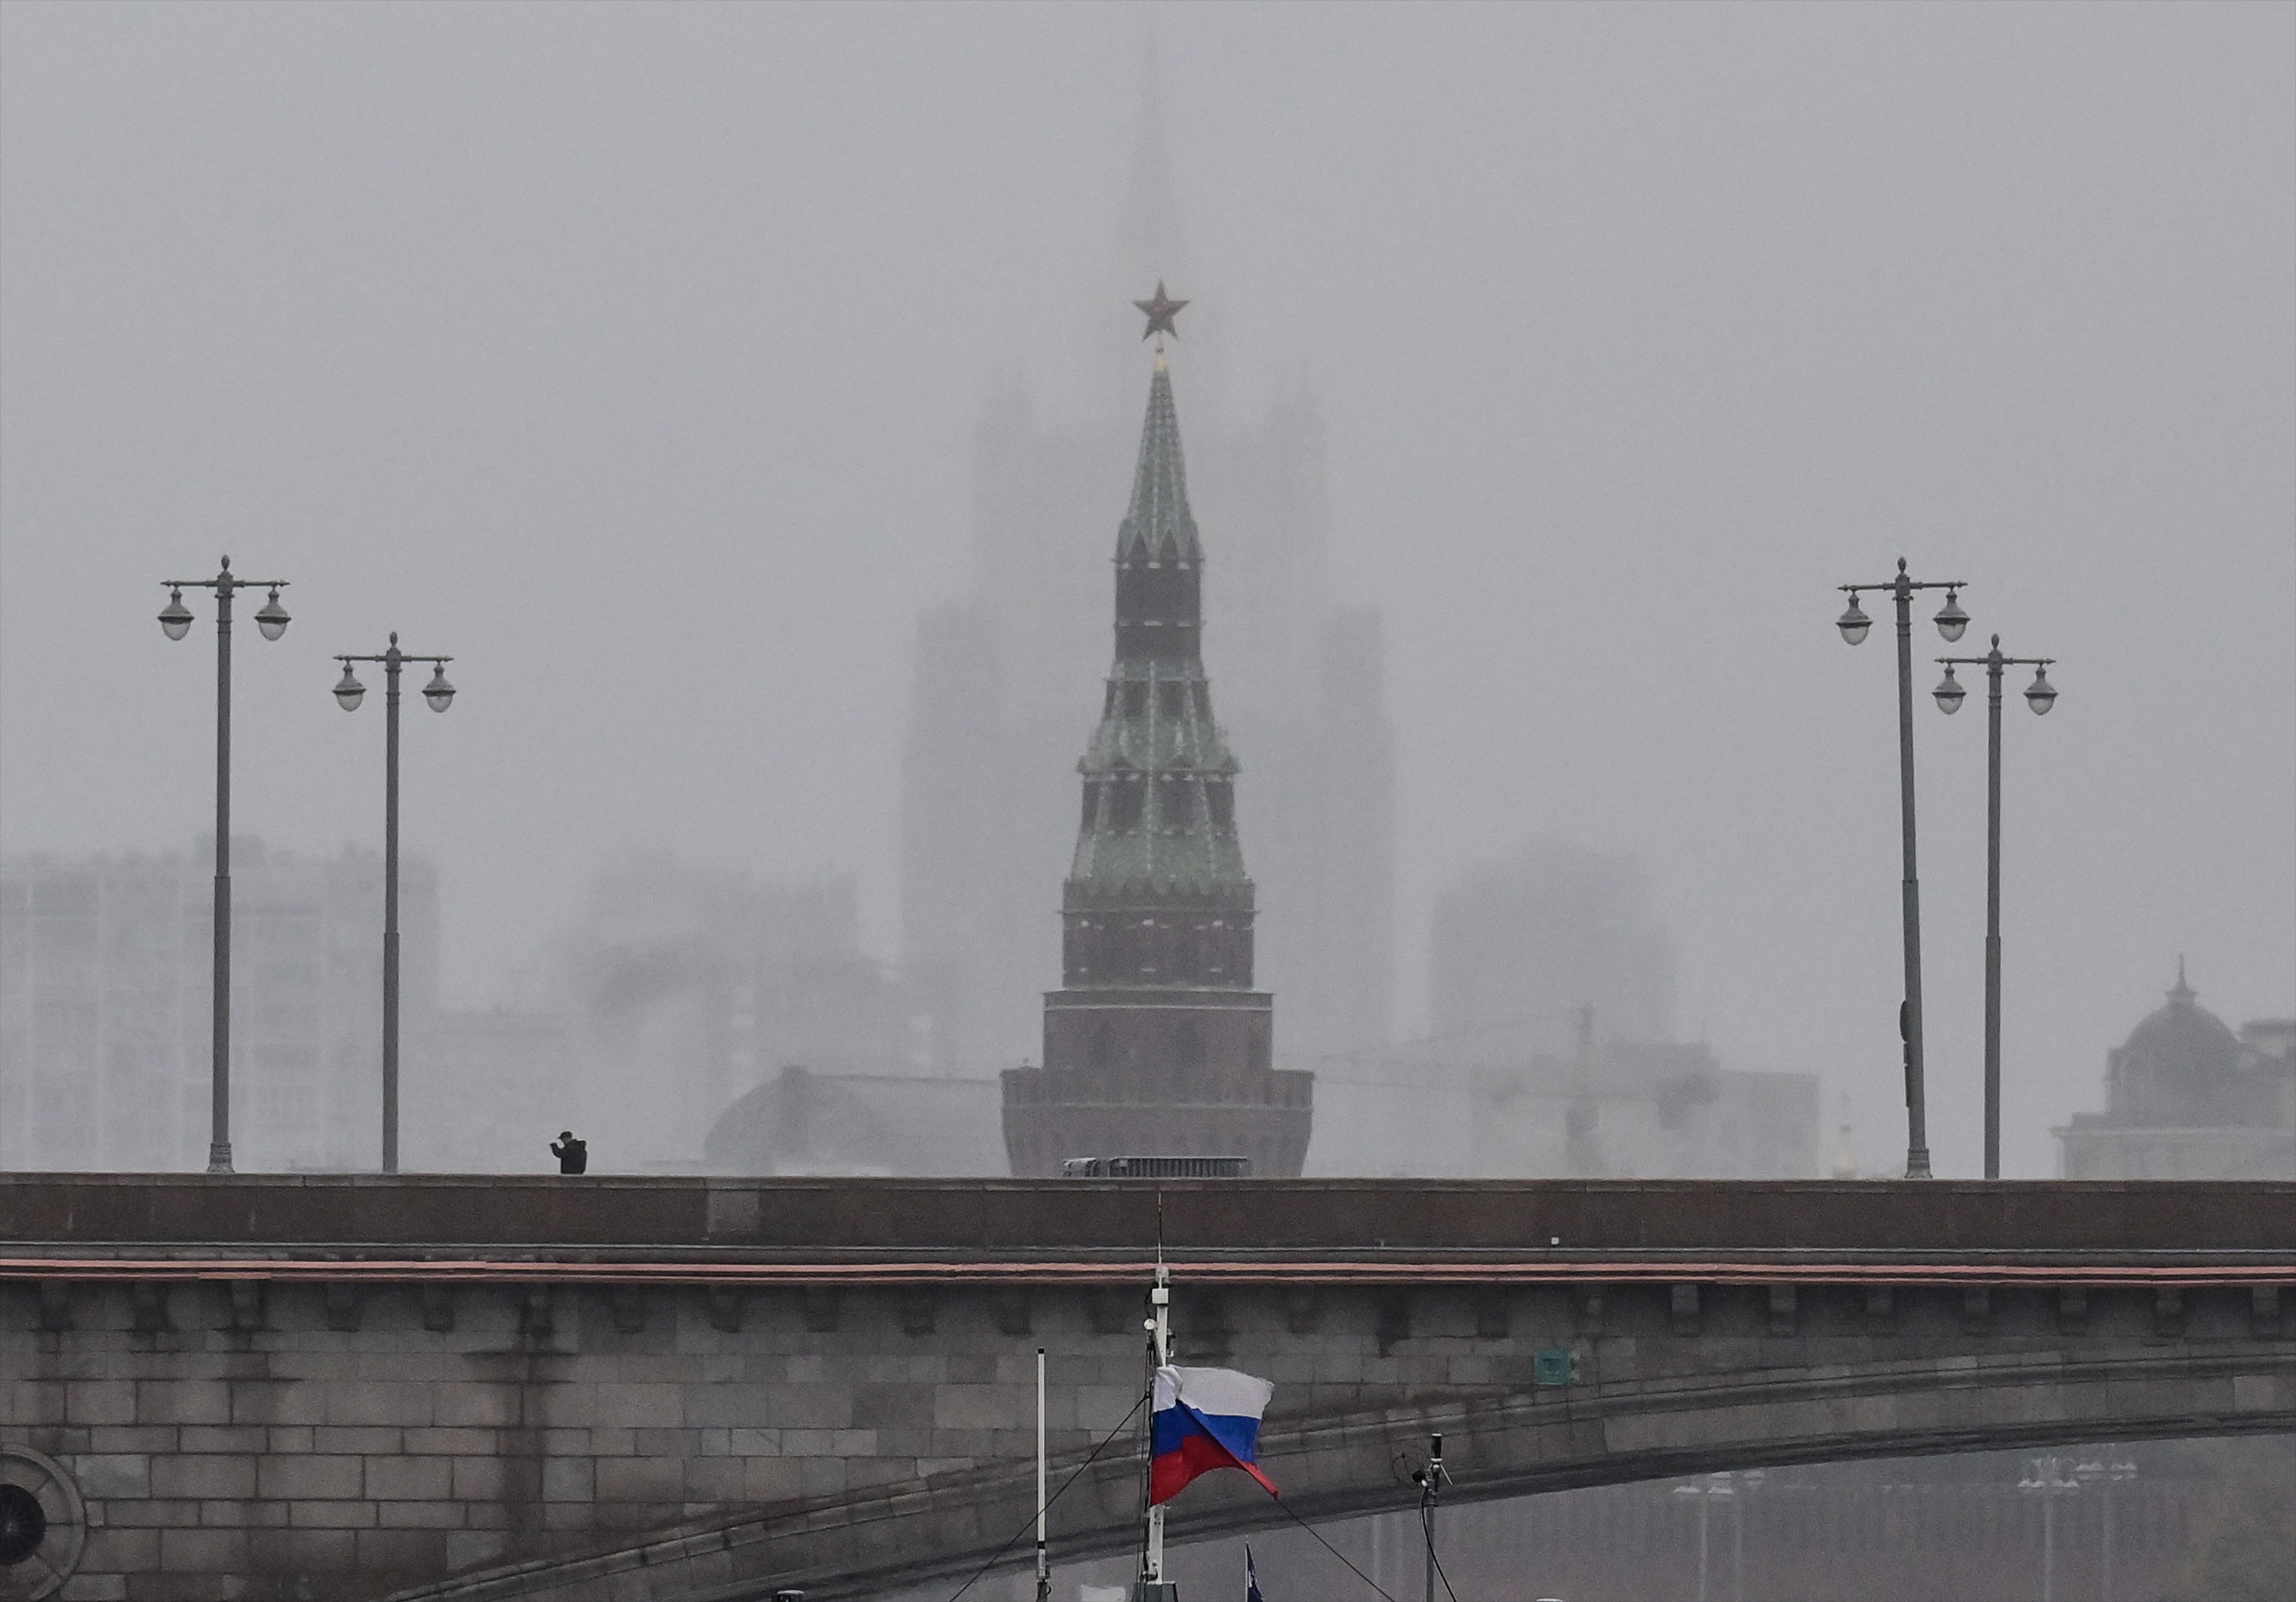 A pedestrian walks along a bridge over the Moskva River in front of the Vodovzvodnaya tower of the Kremlin and the Russian Foreign Ministry headquarters in central Moscow on October 4, 2022.